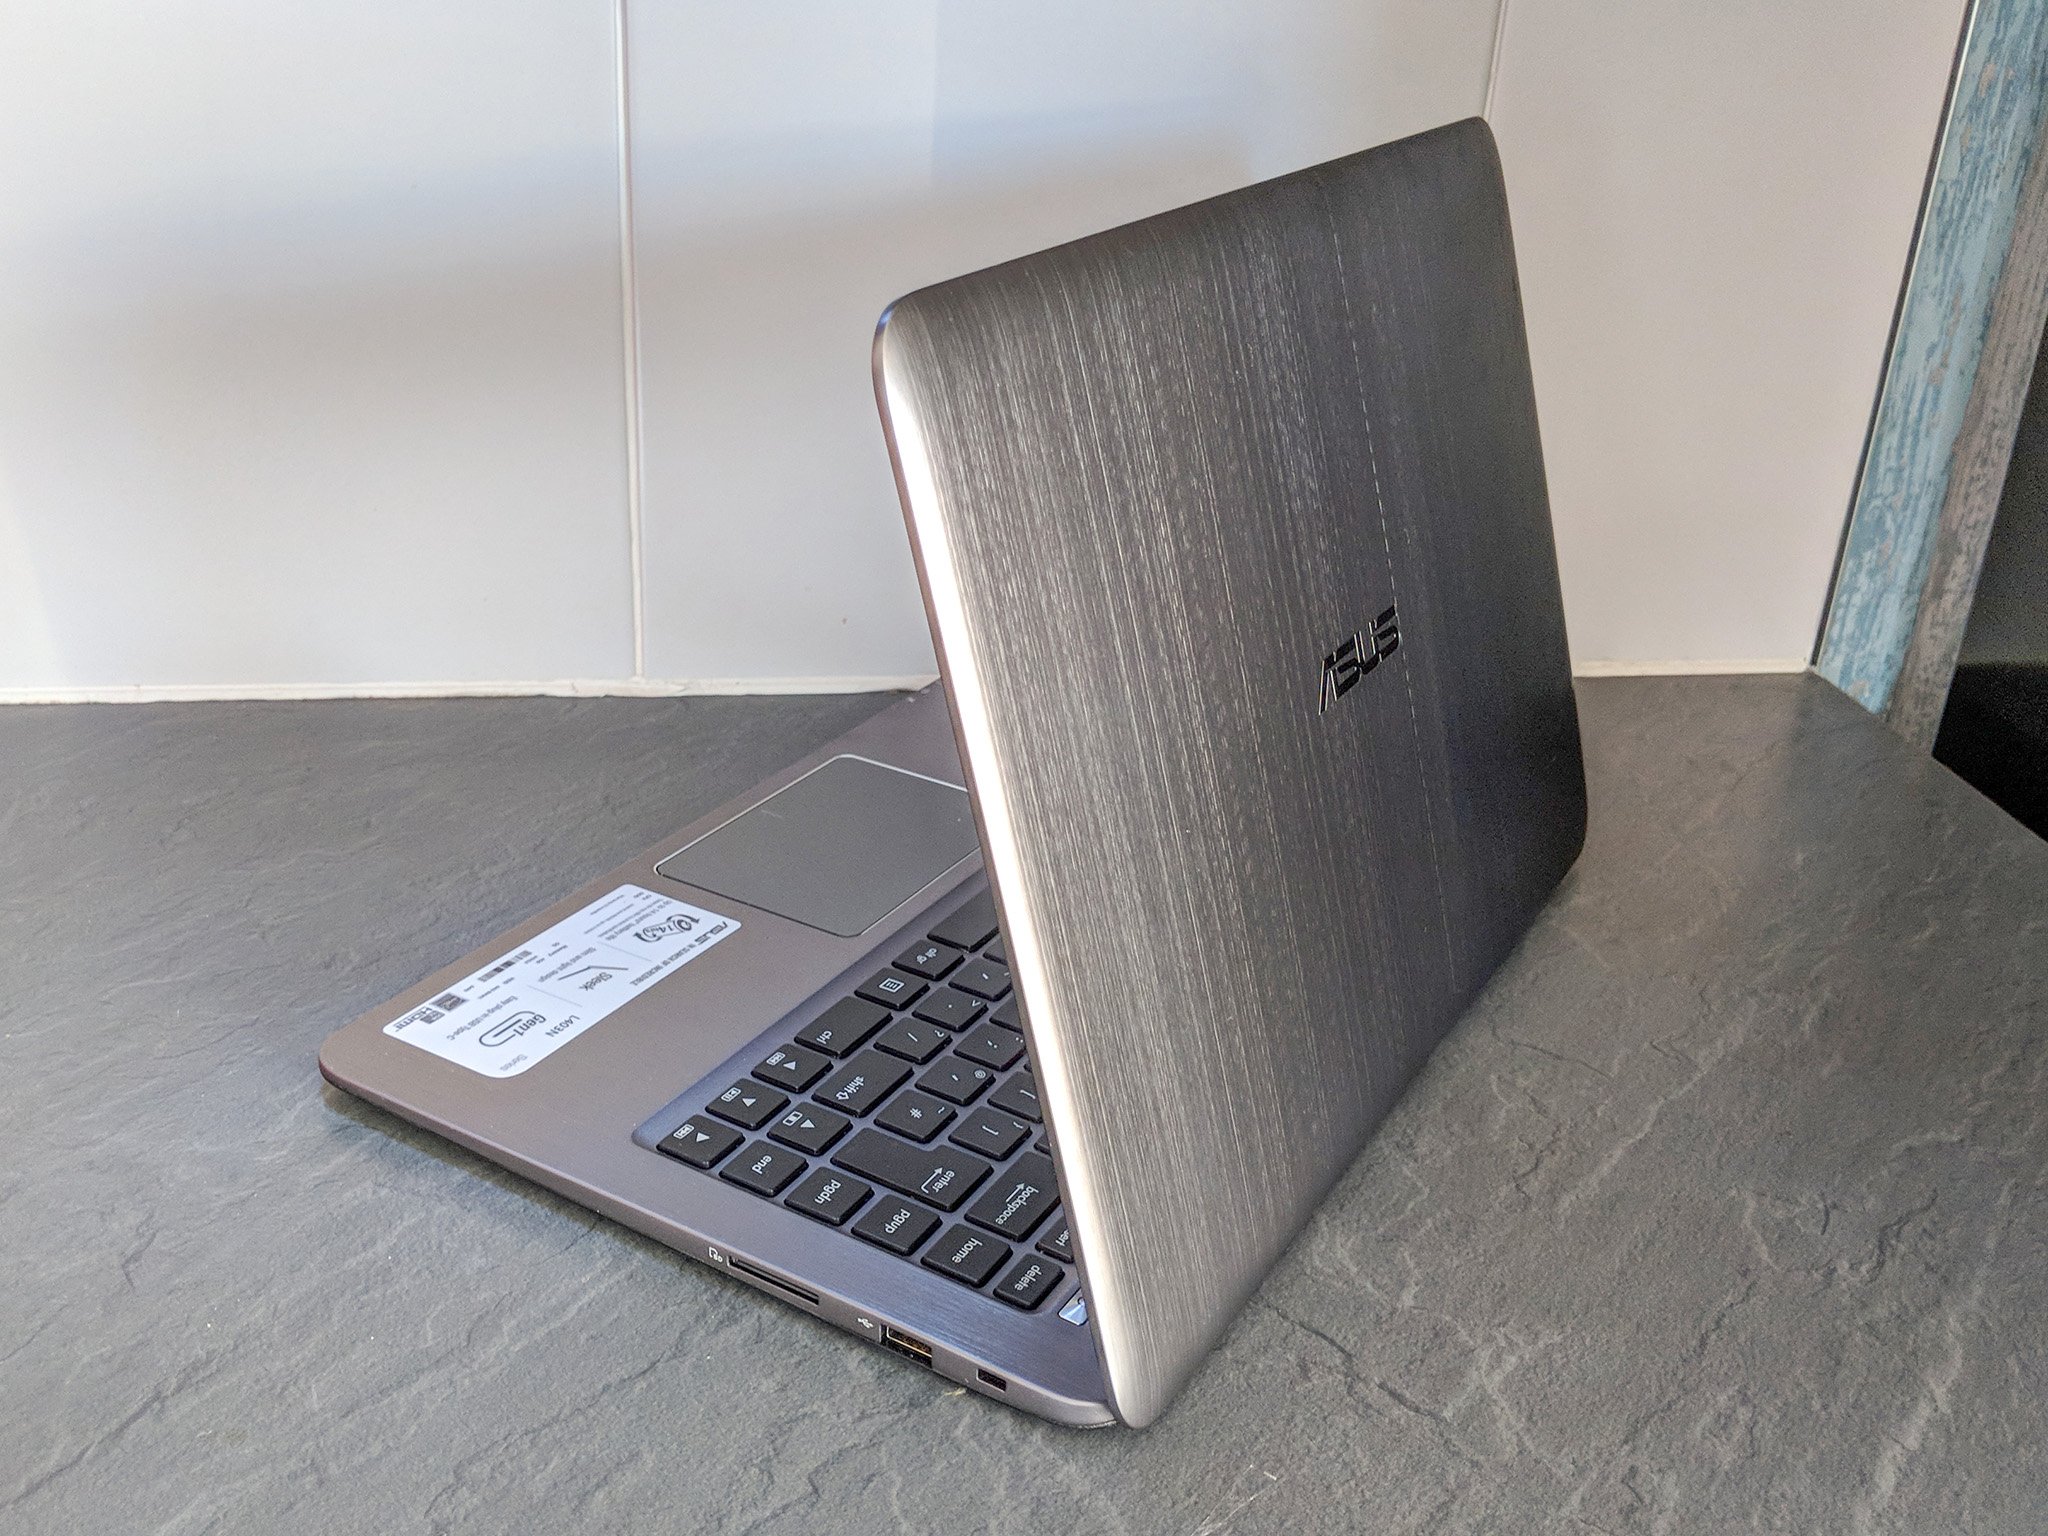 ASUS VivoBook L403 review: A stylish laptop for students with terrific ...